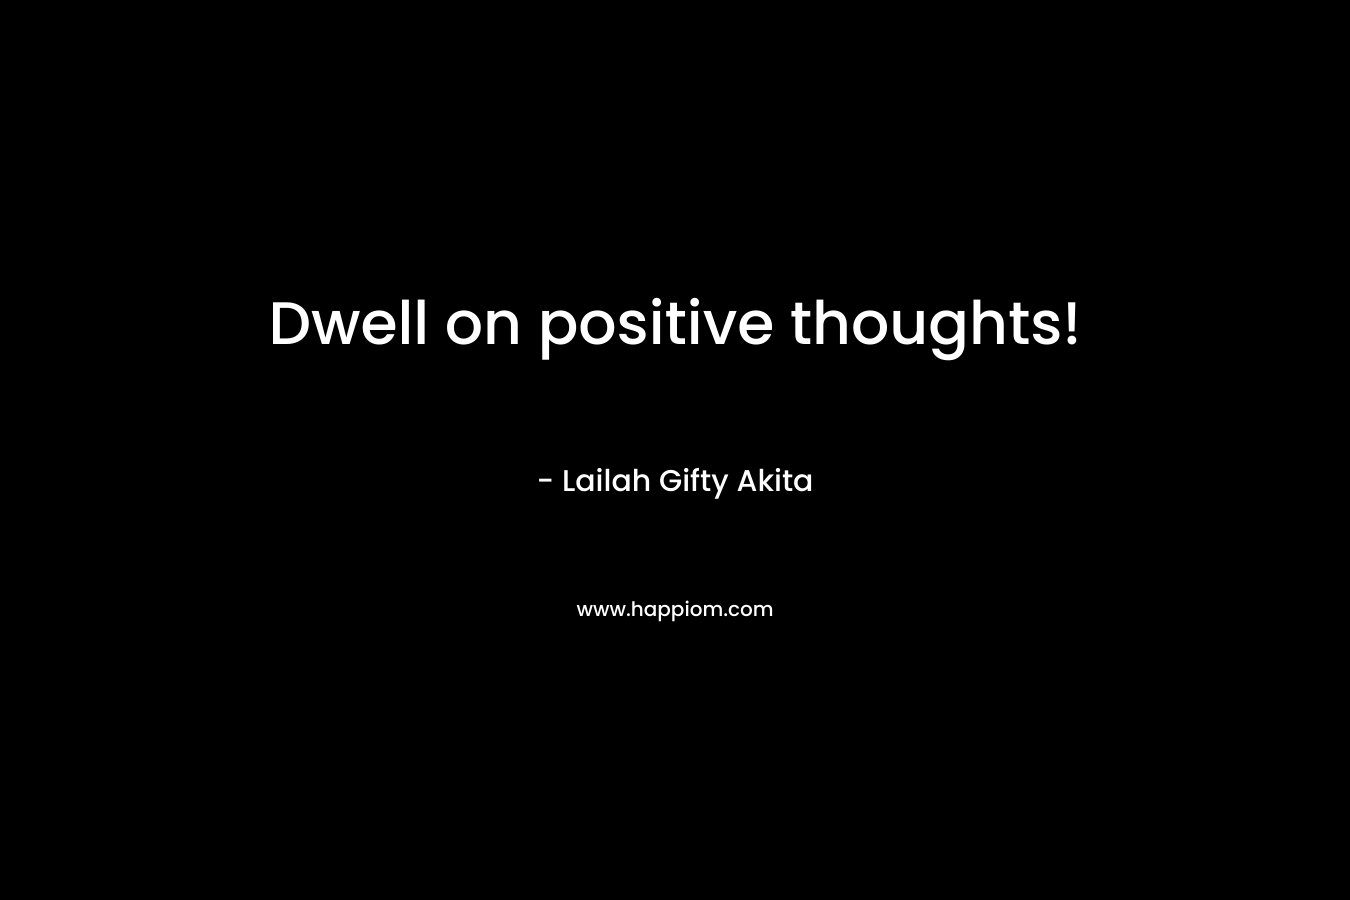 Dwell on positive thoughts!